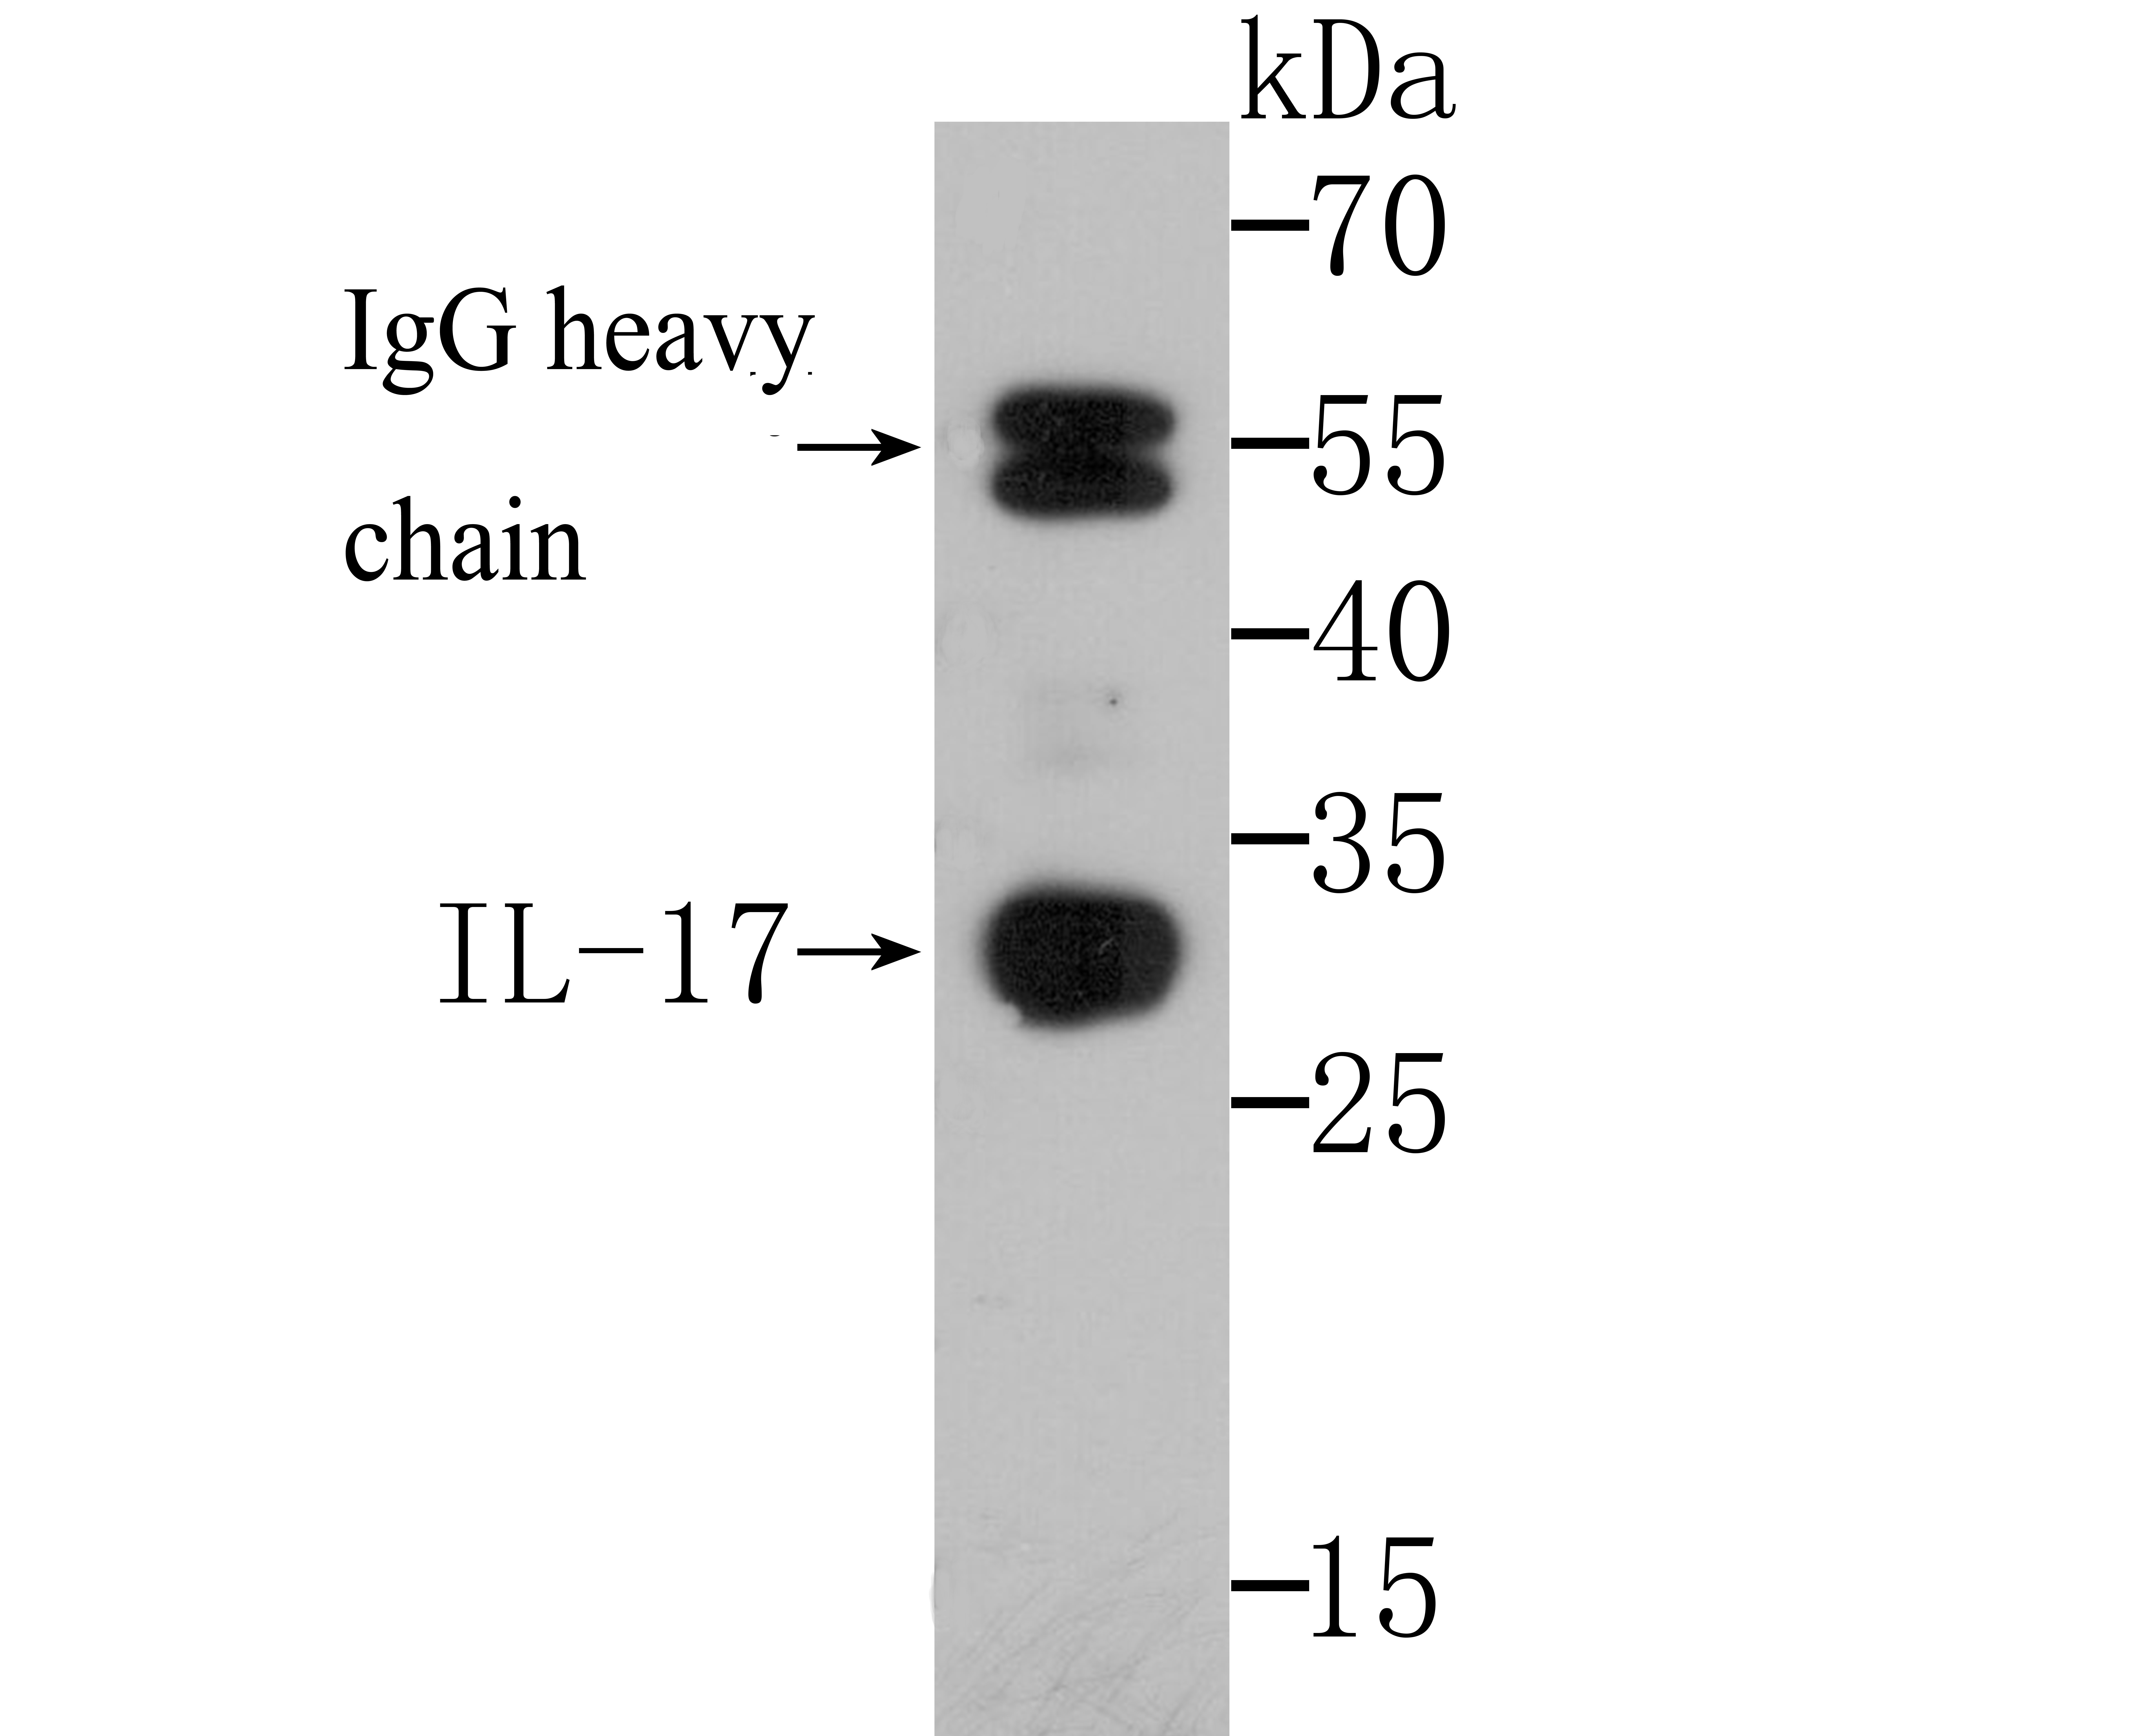 Western blot analysis of IL-17 on human fetal skeletal muscle tissue lysates using anti-IL-17 antibody at 1/500 dilution.